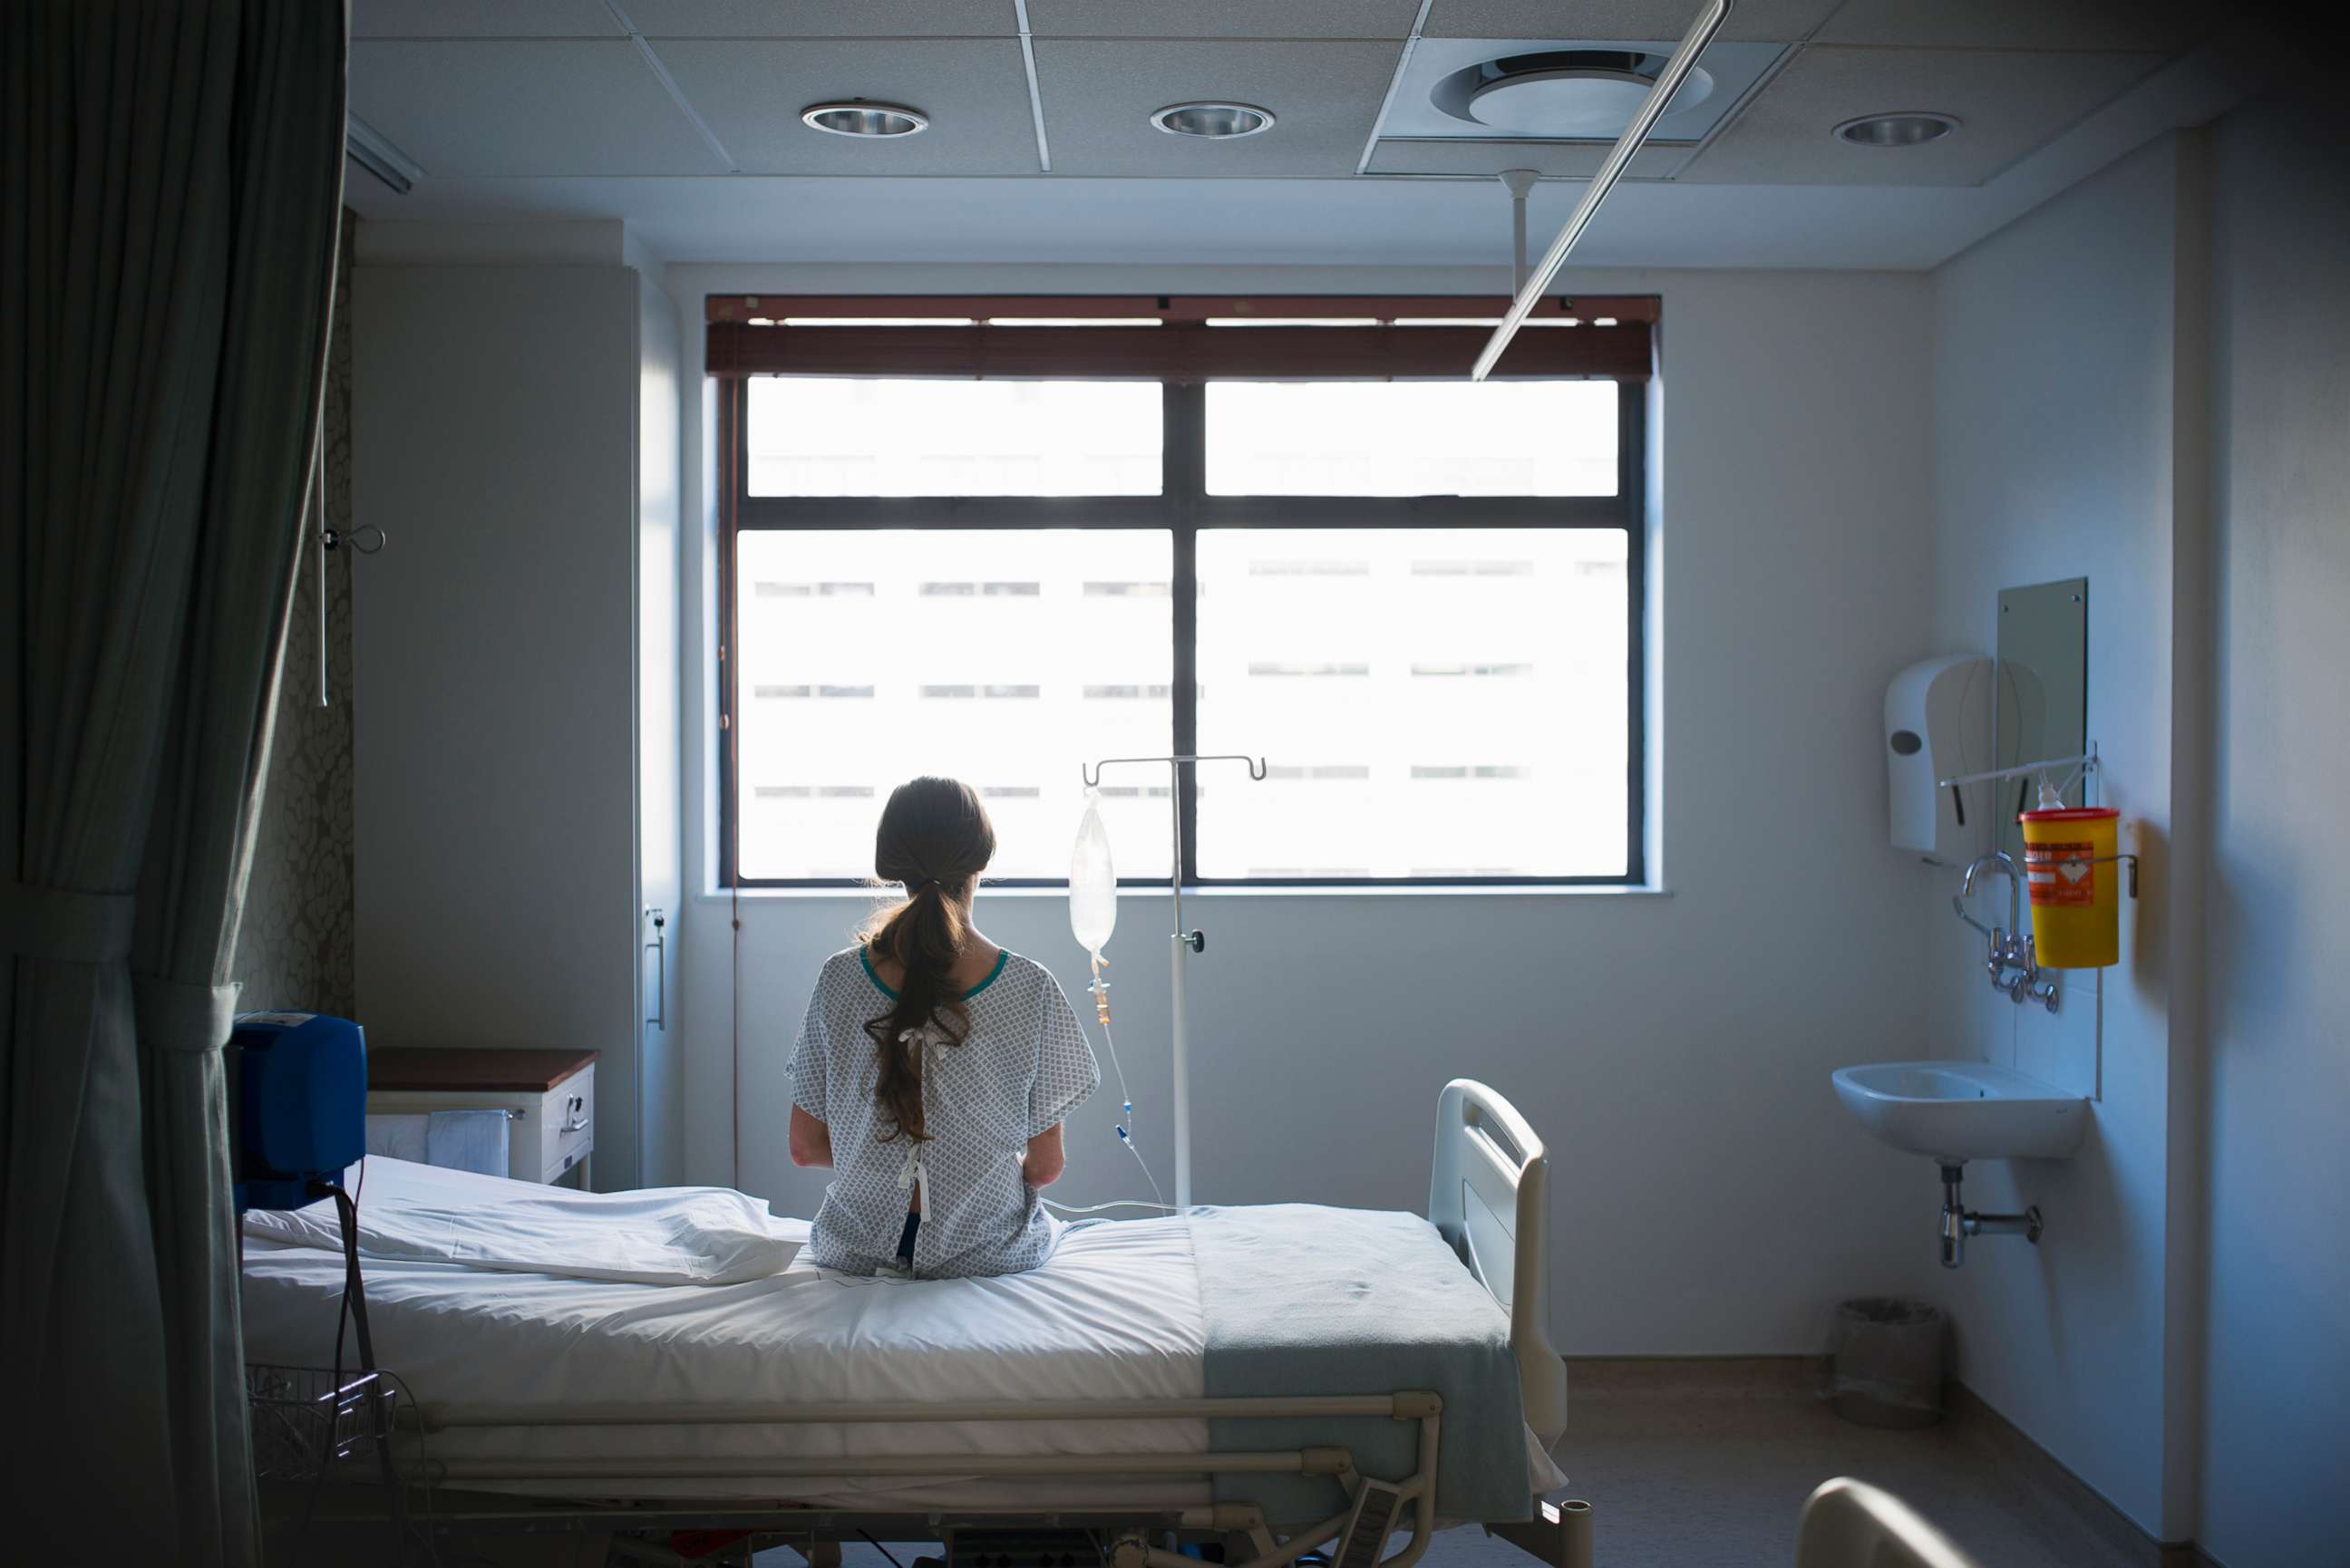 PHOTO: A patient sitting on a hospital bed is pictured in this undated stock photo.